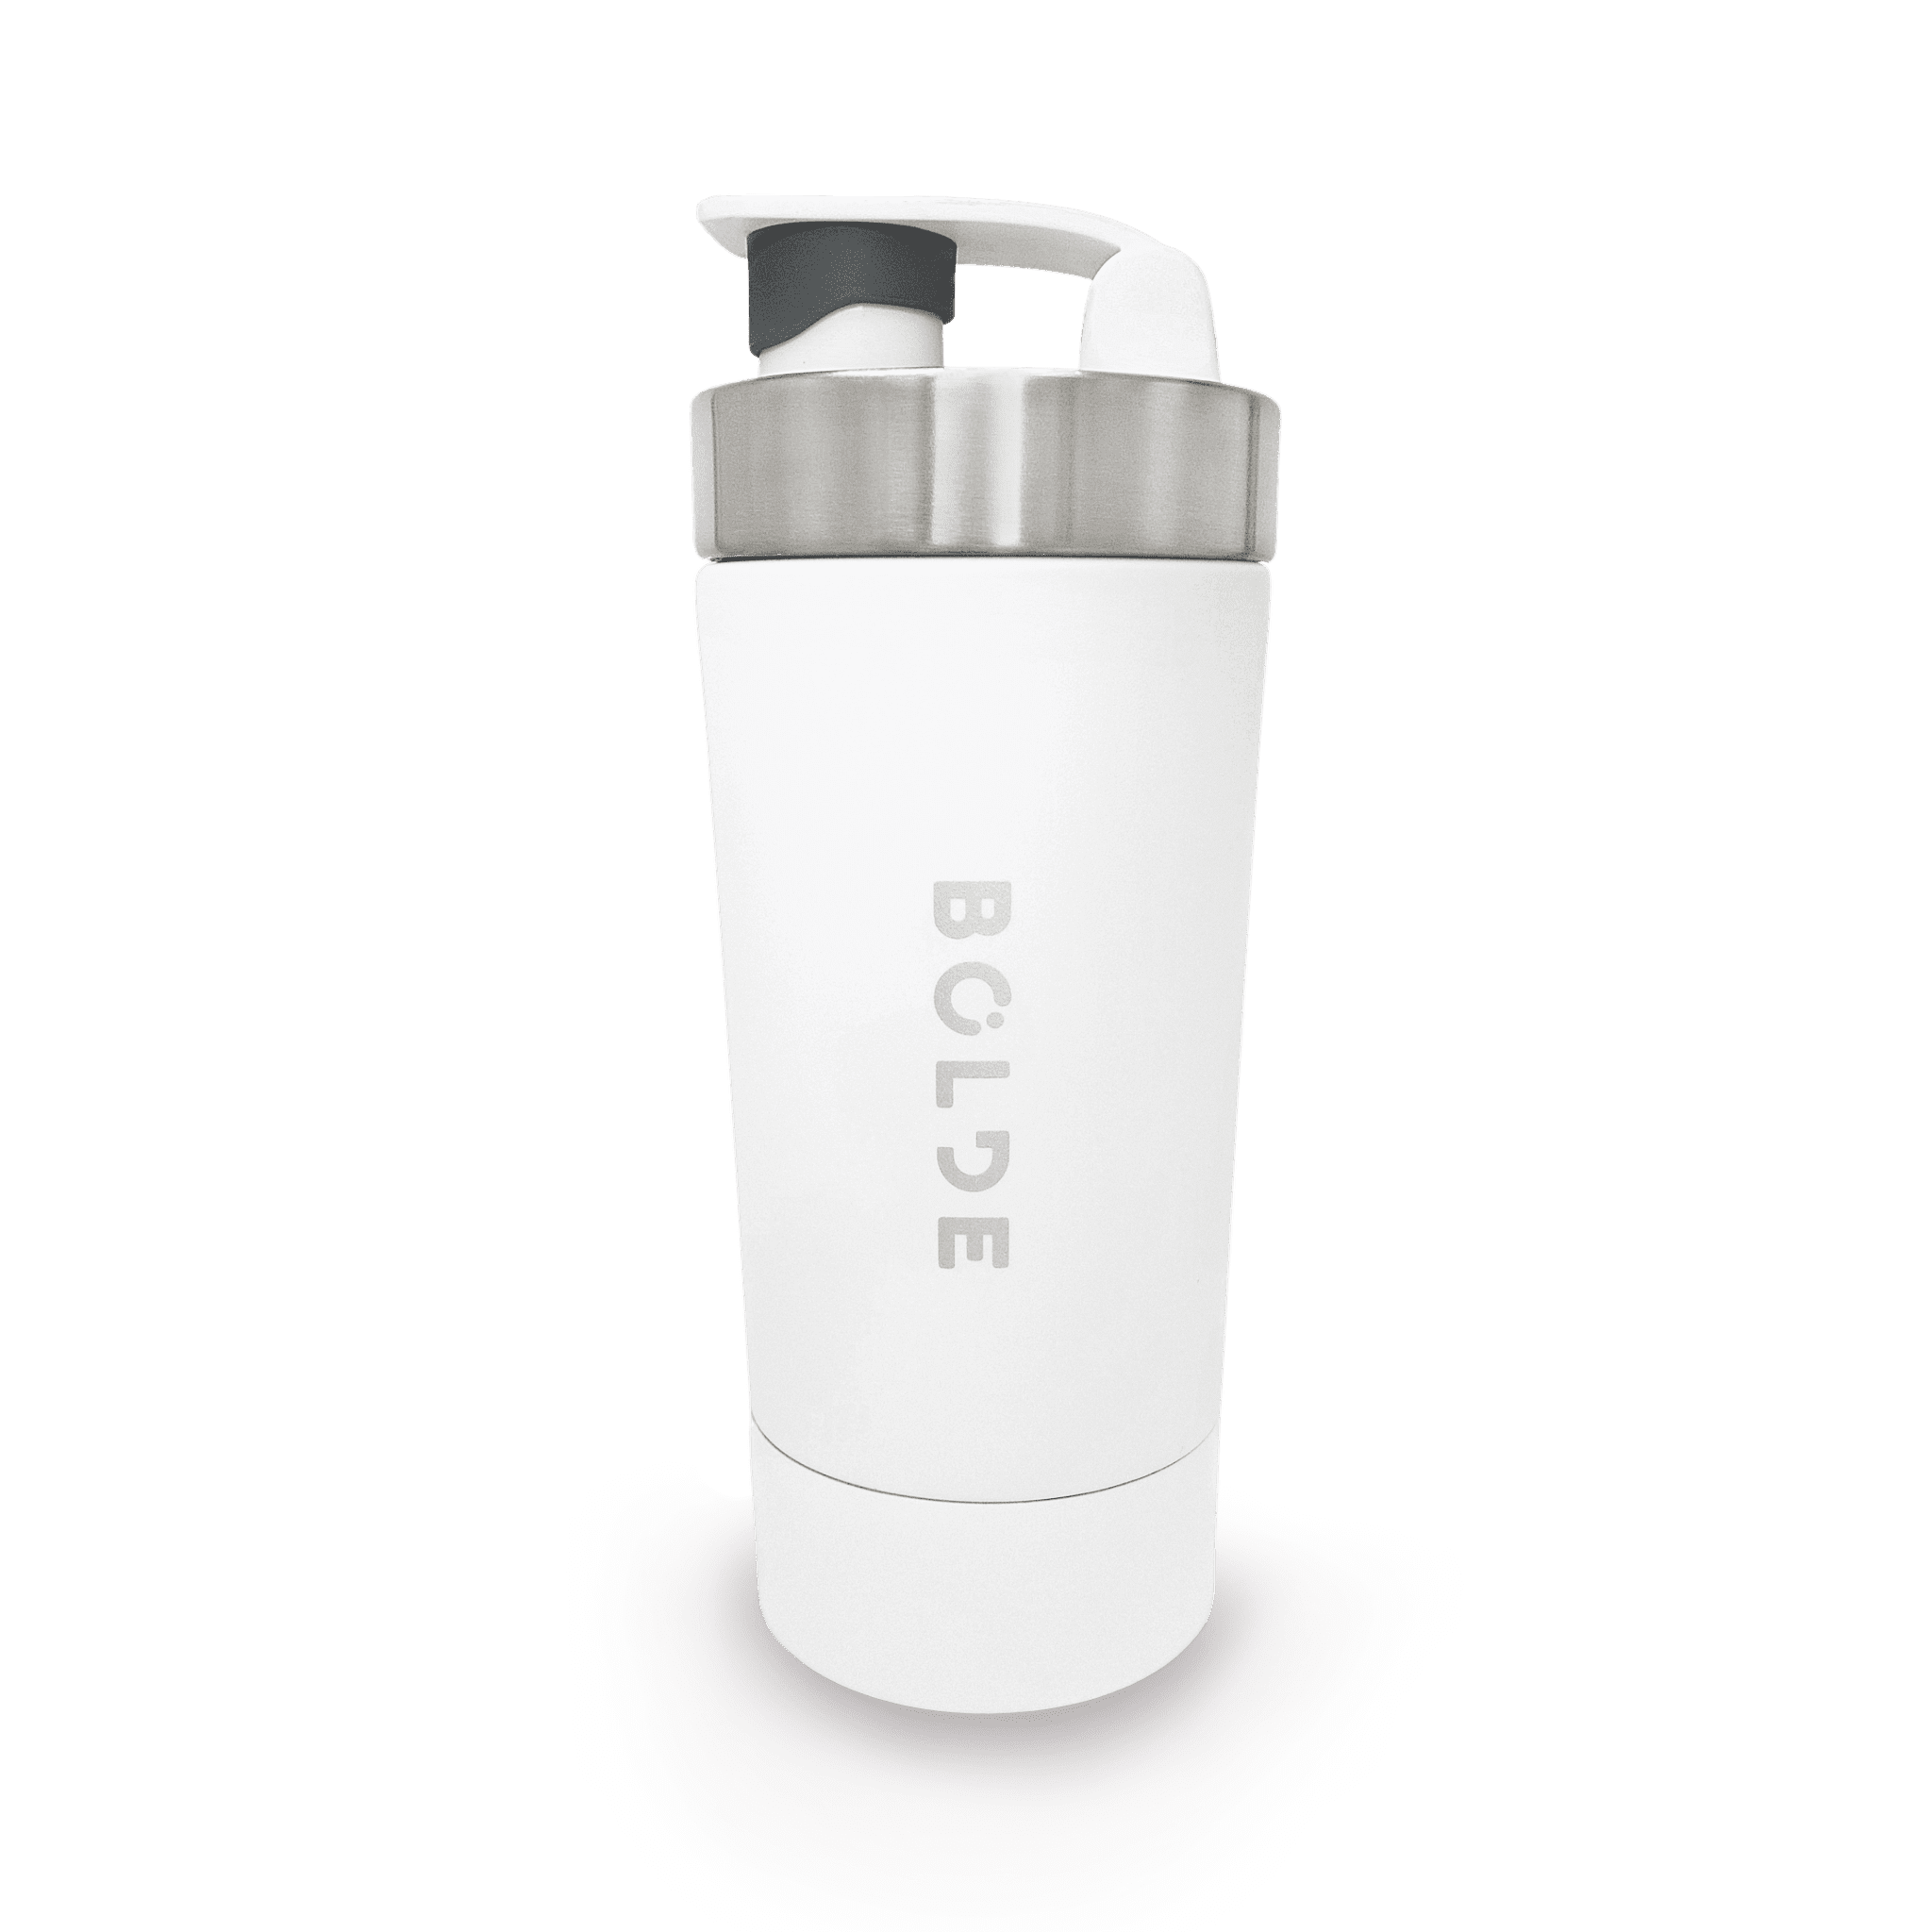 Did You Even Back the Bolde Bottle Shaker for Your Protein Drinks, Bro?